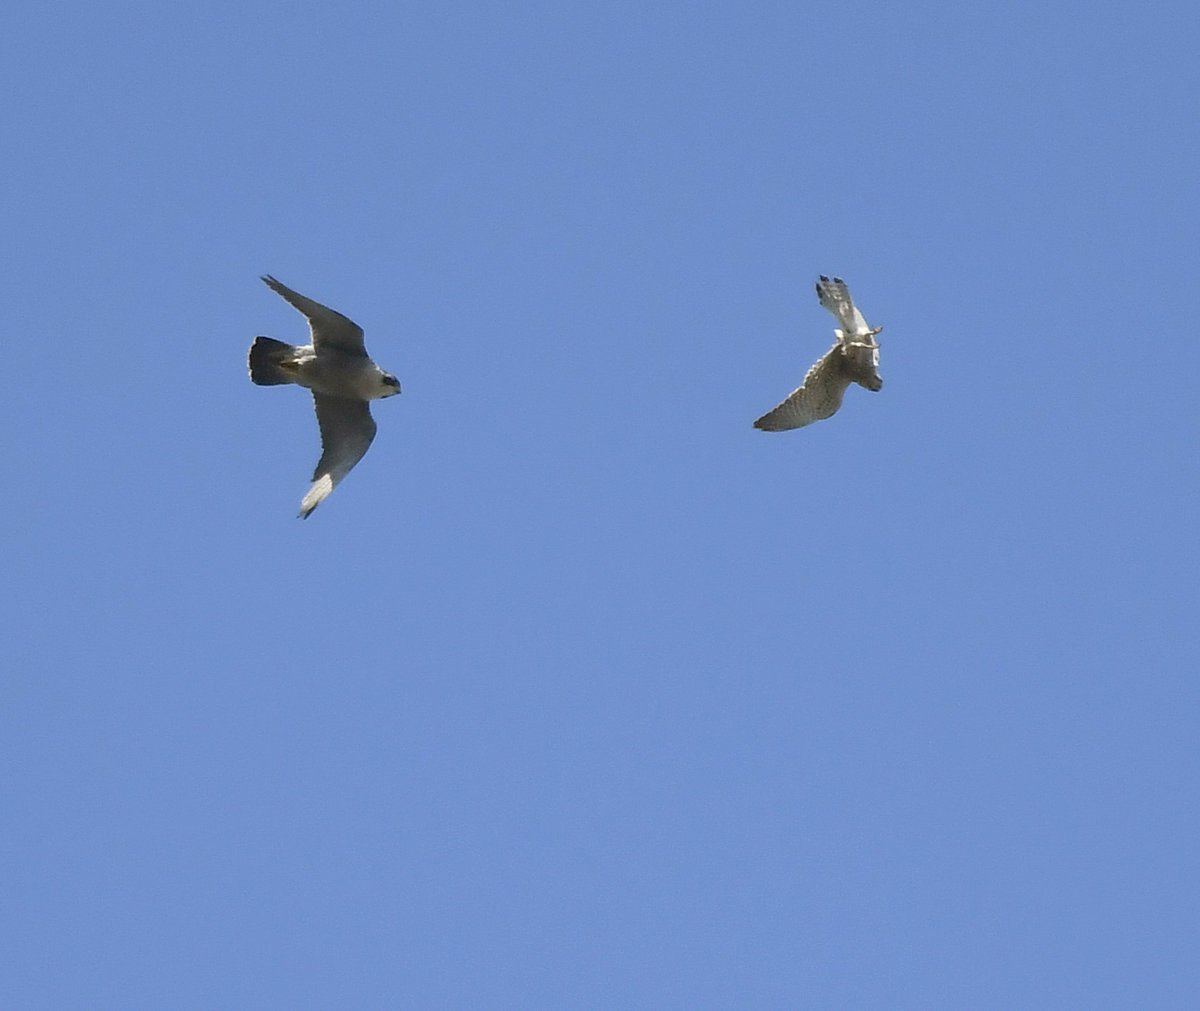 22 and 23. Peregrine Falcon & Kestrel Having a lazy moment laying on my swing-seat looking at the sky yesterday, when I saw this drama playing out between Falcons, very high above! The Kestrel (smaller bird) kept mobbing the Peregrine! Wonderful! #LockdownGardenBirdsSeen 